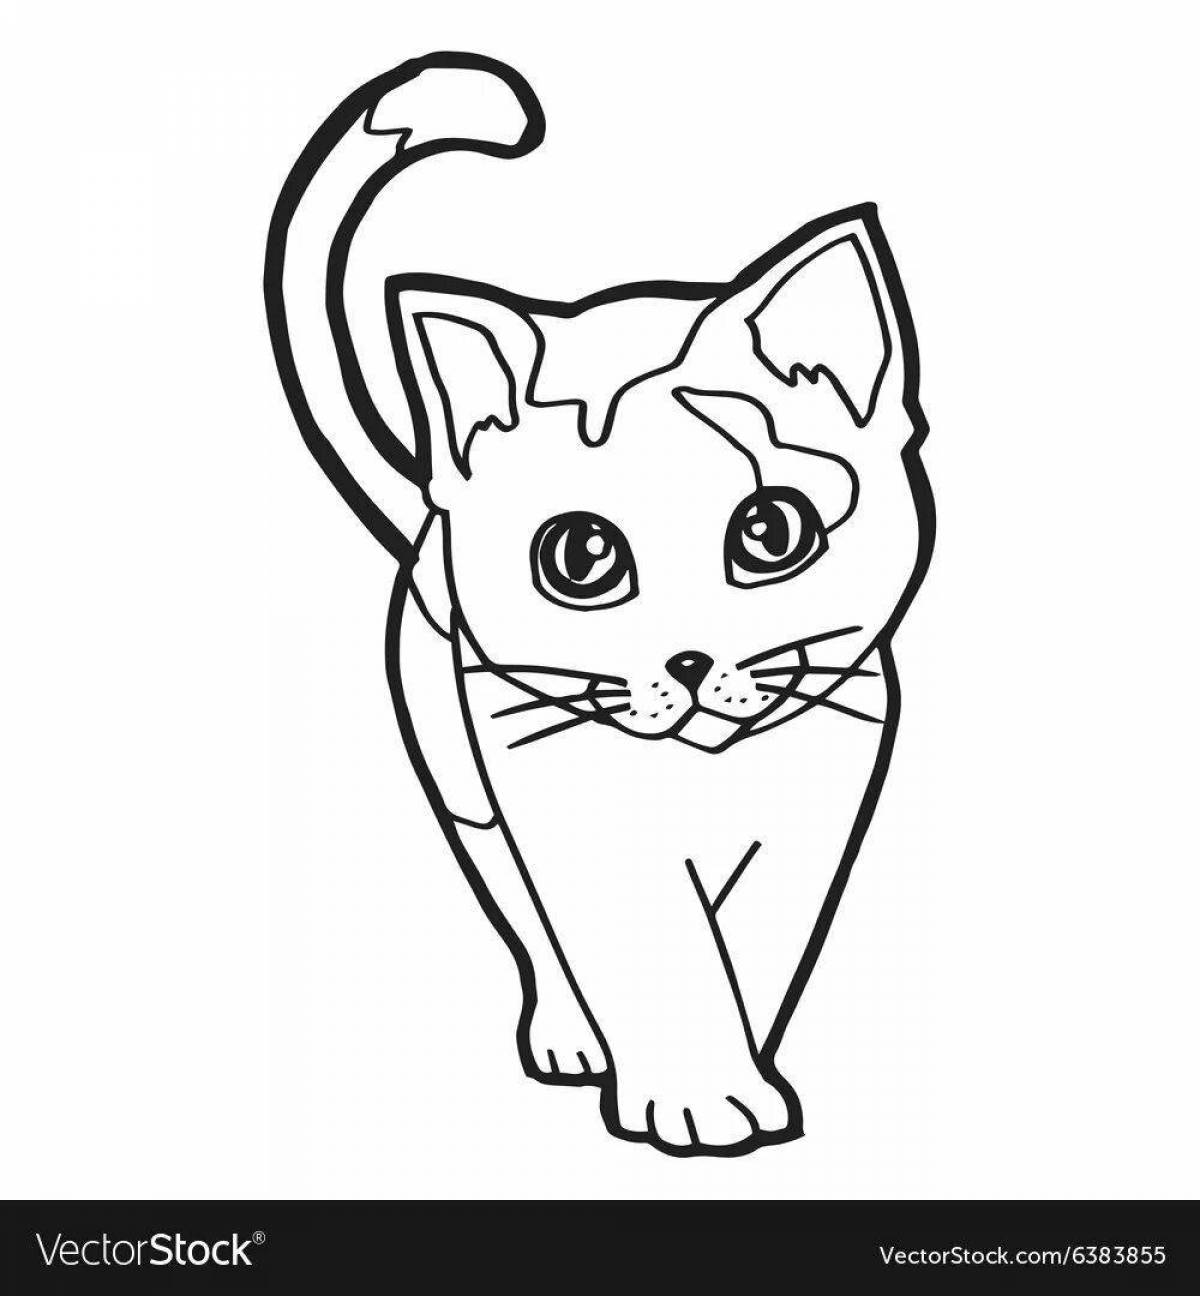 Coloring book sparkling cat without whiskers